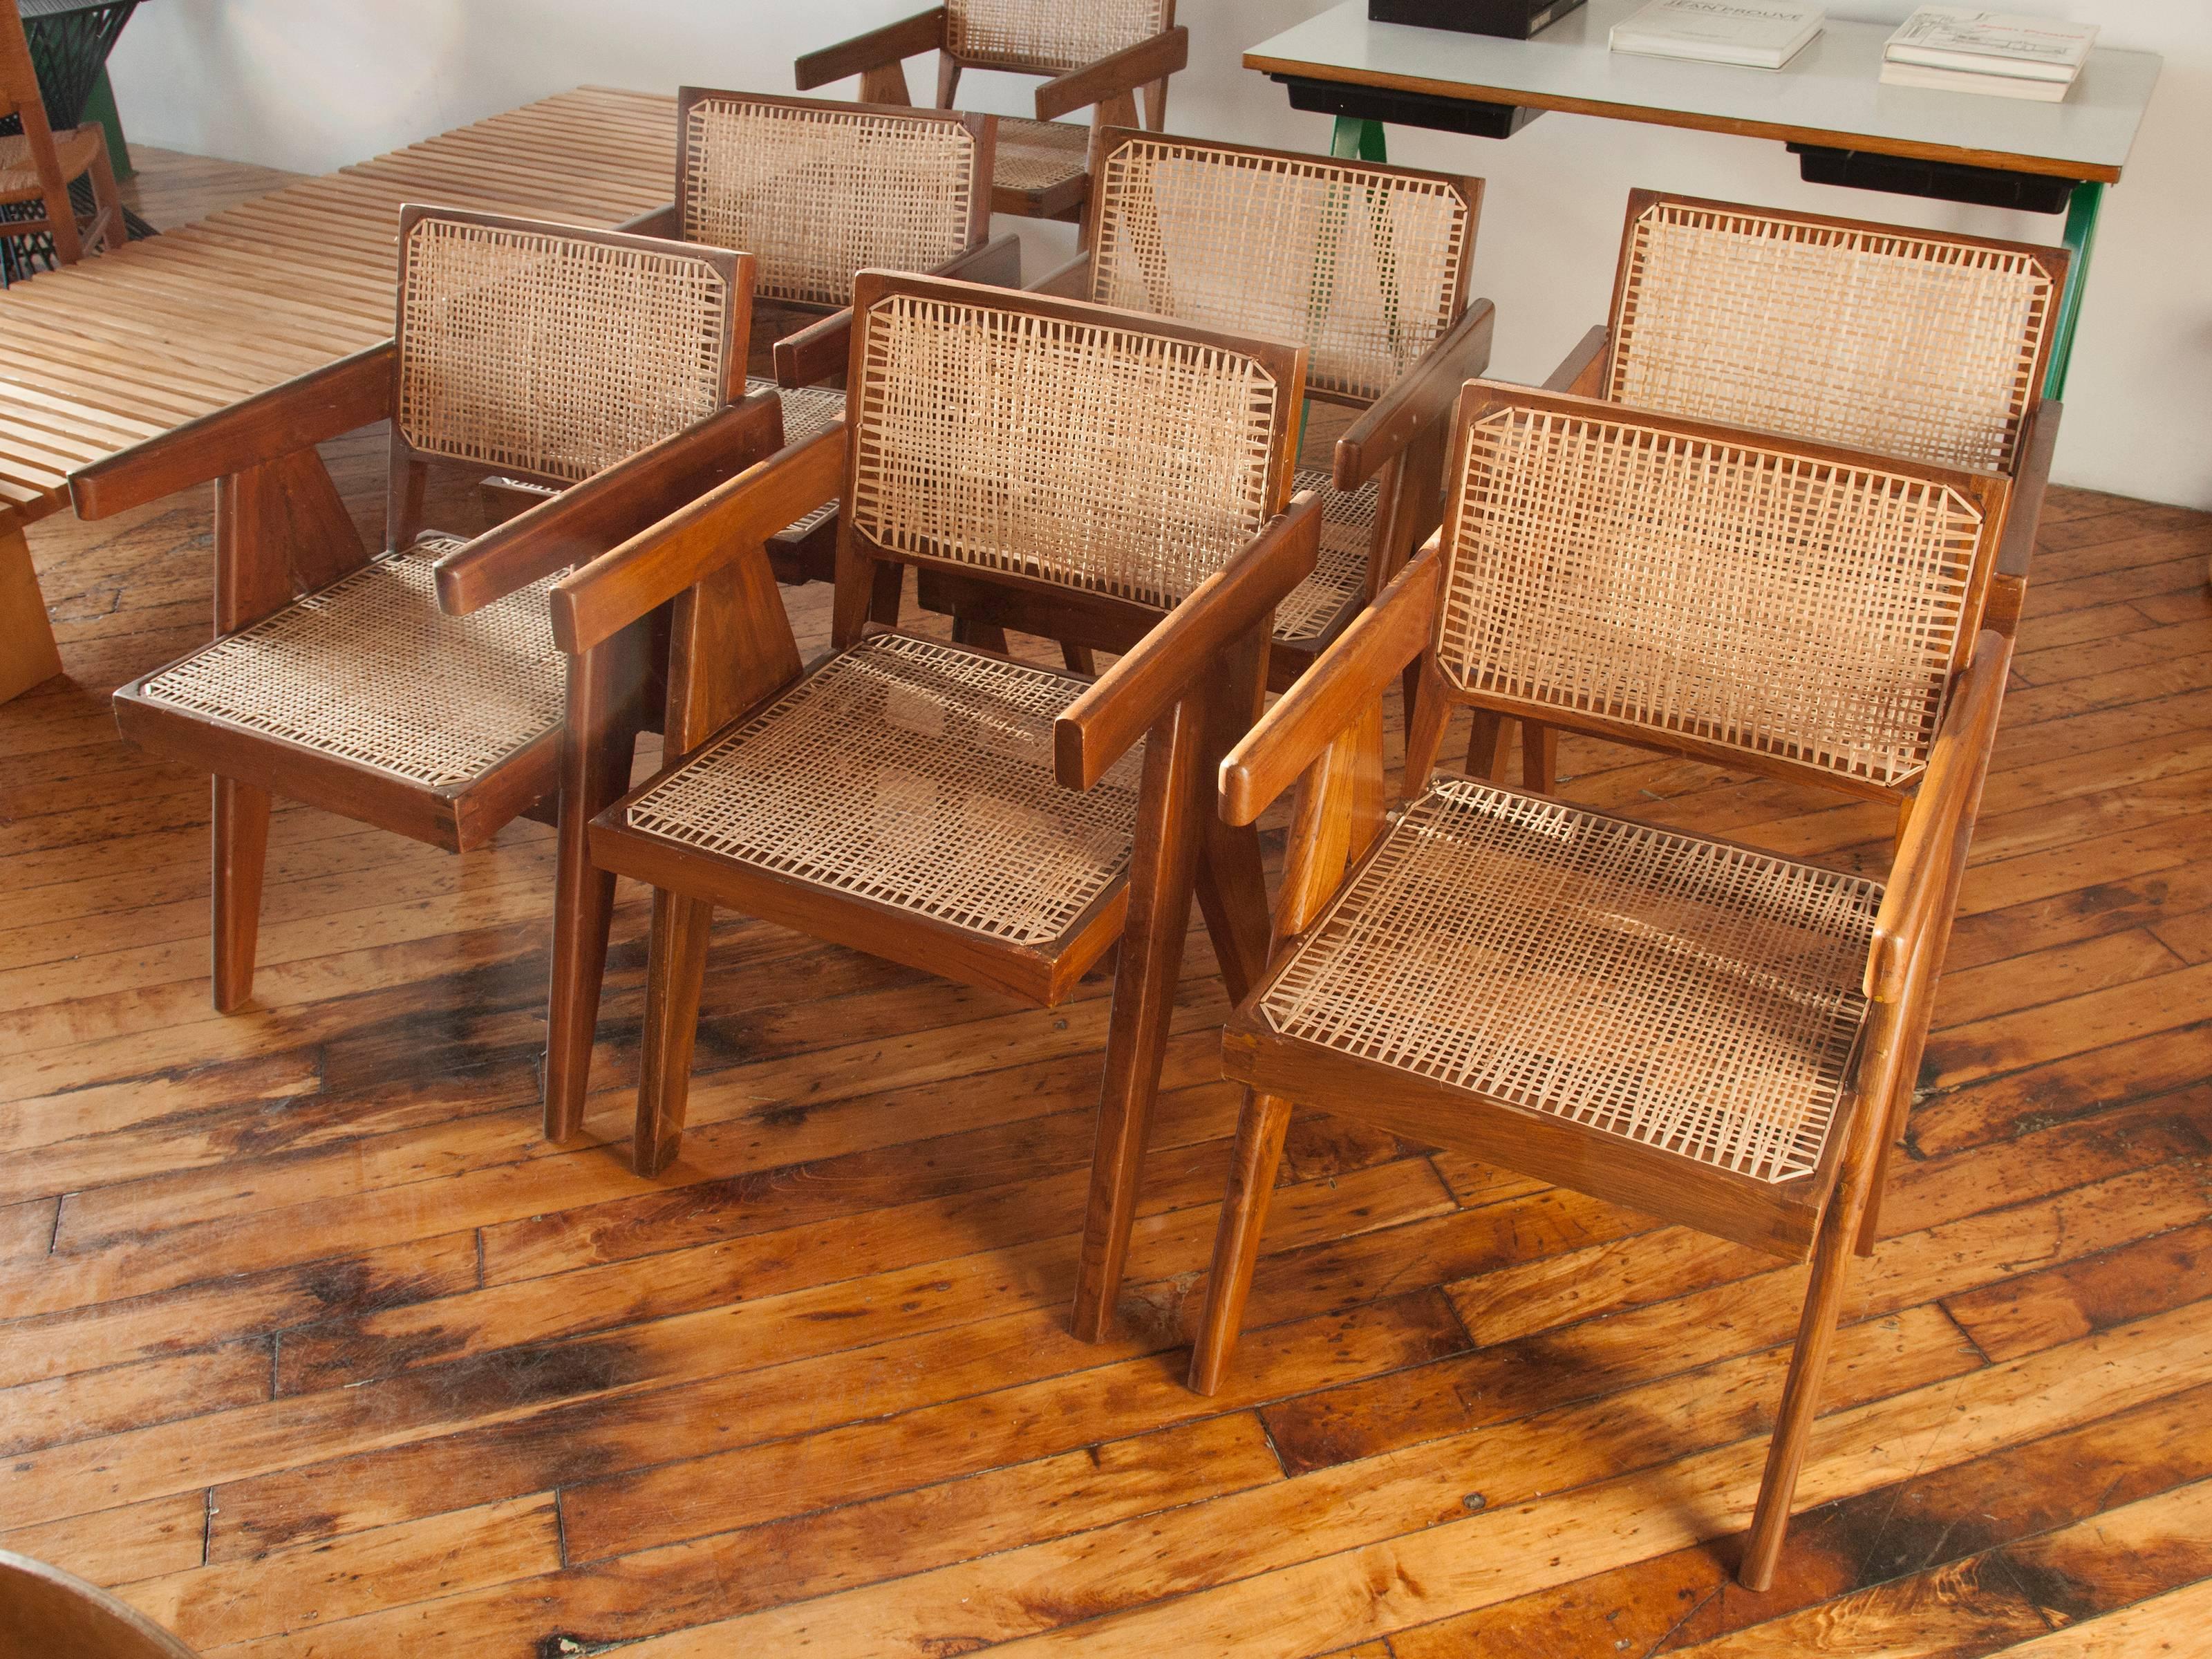 Exceptionally matched set of six teak and cane armchairs by Pierre Jeanneret from the administrative buildings of Chandigarh, India.